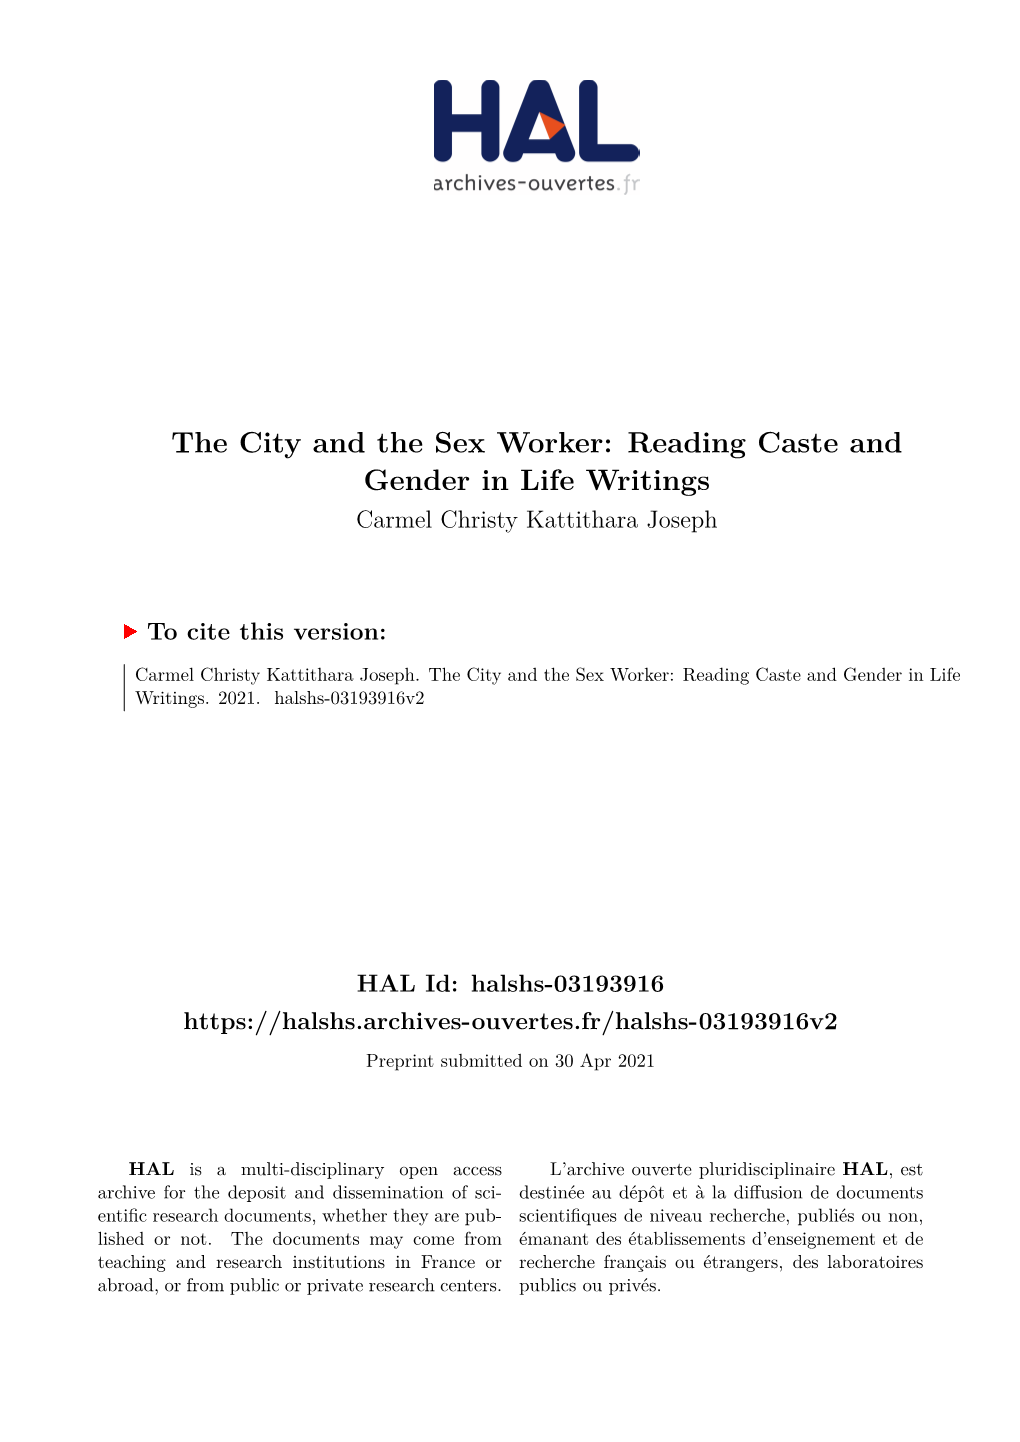 The City and the Sex Worker: Reading Caste and Gender in Life Writings Carmel Christy Kattithara Joseph